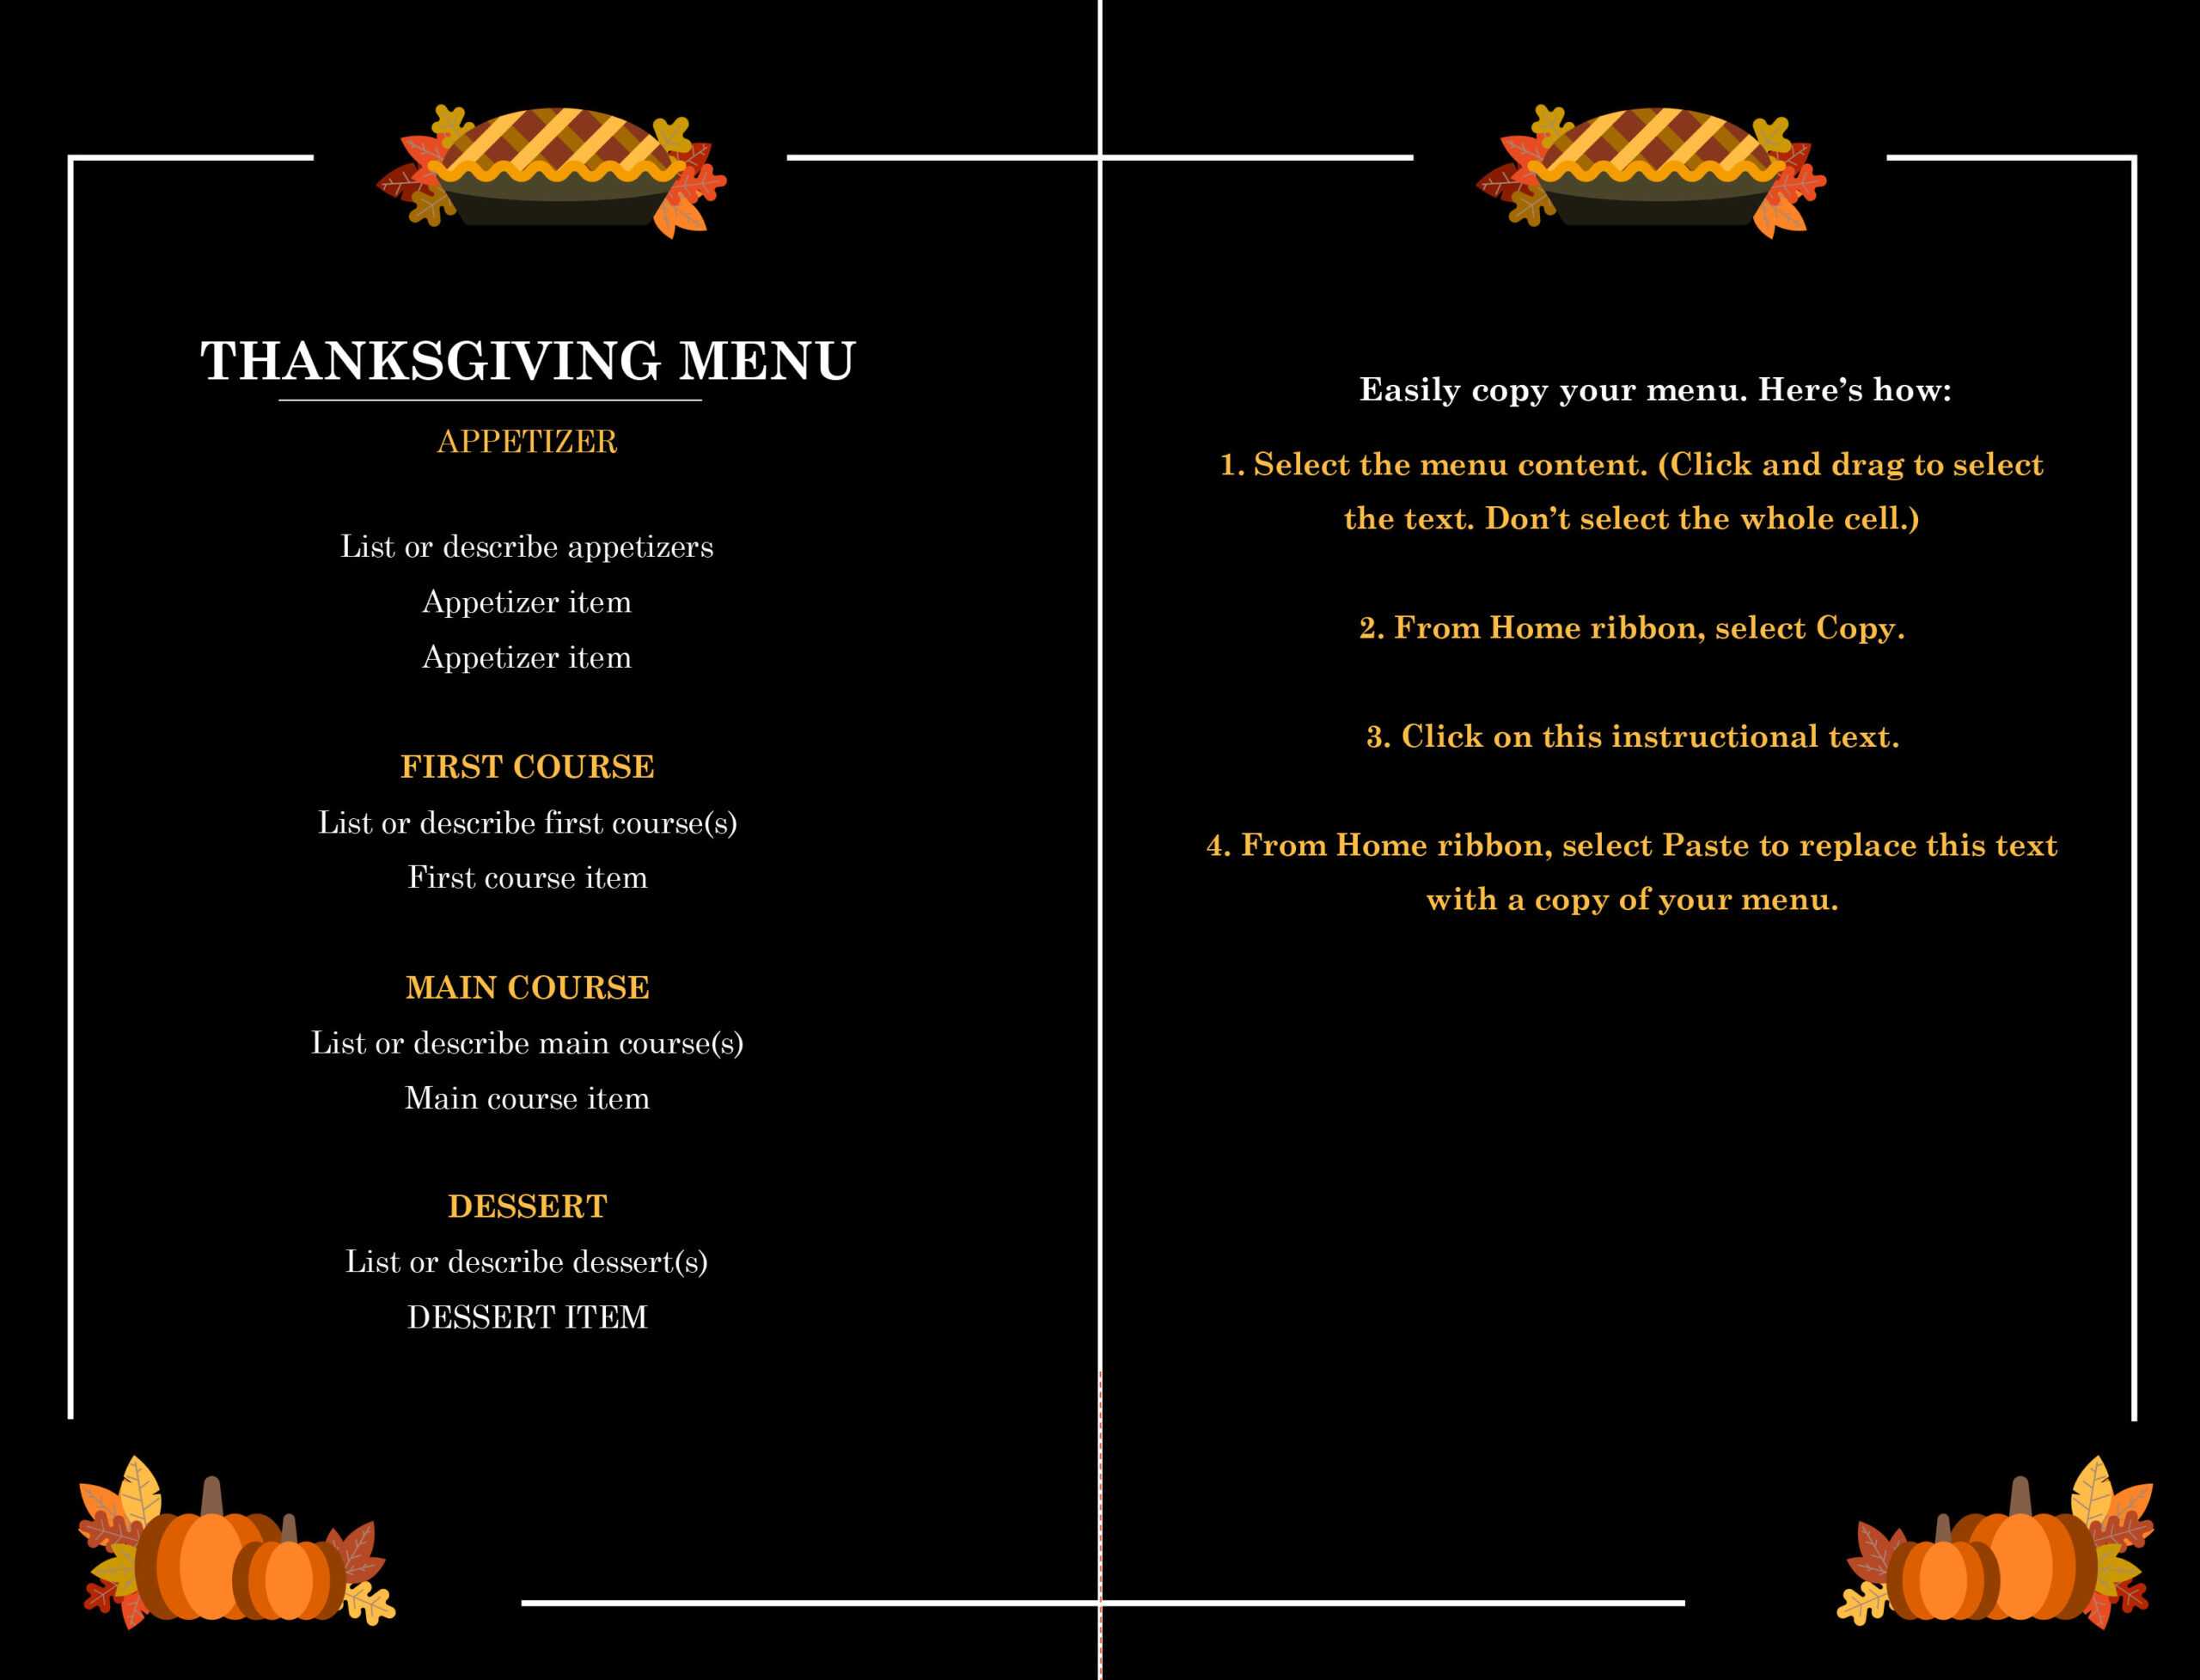 32 Free Simple Menu Templates For Restaurants, Cafes, And With Football Menu Templates